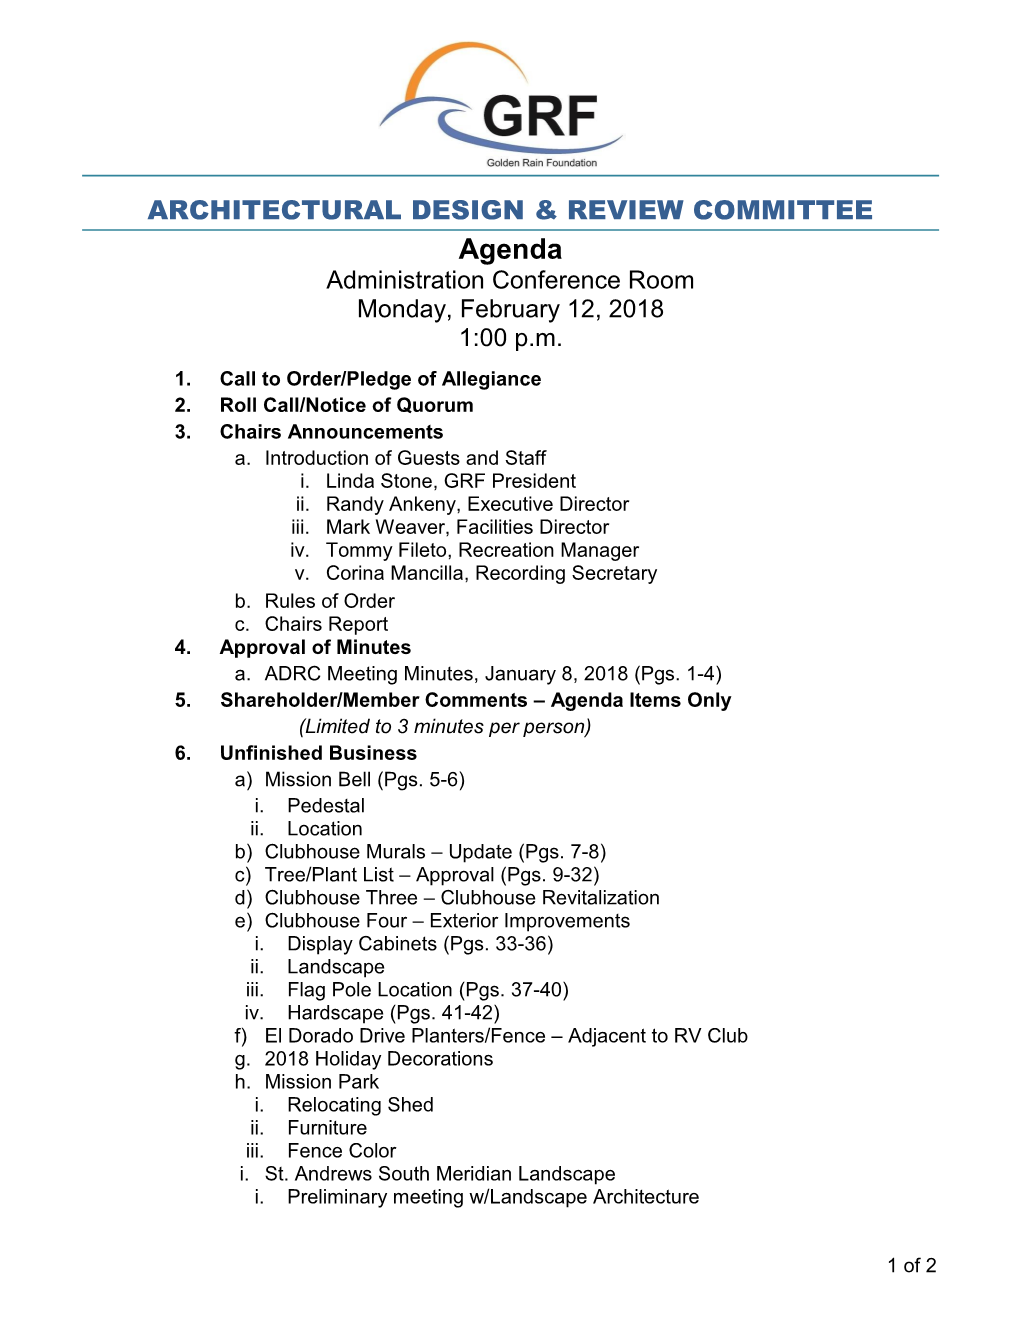 Agenda Administration Conference Room Monday, February 12, 2018 1:00 P.M